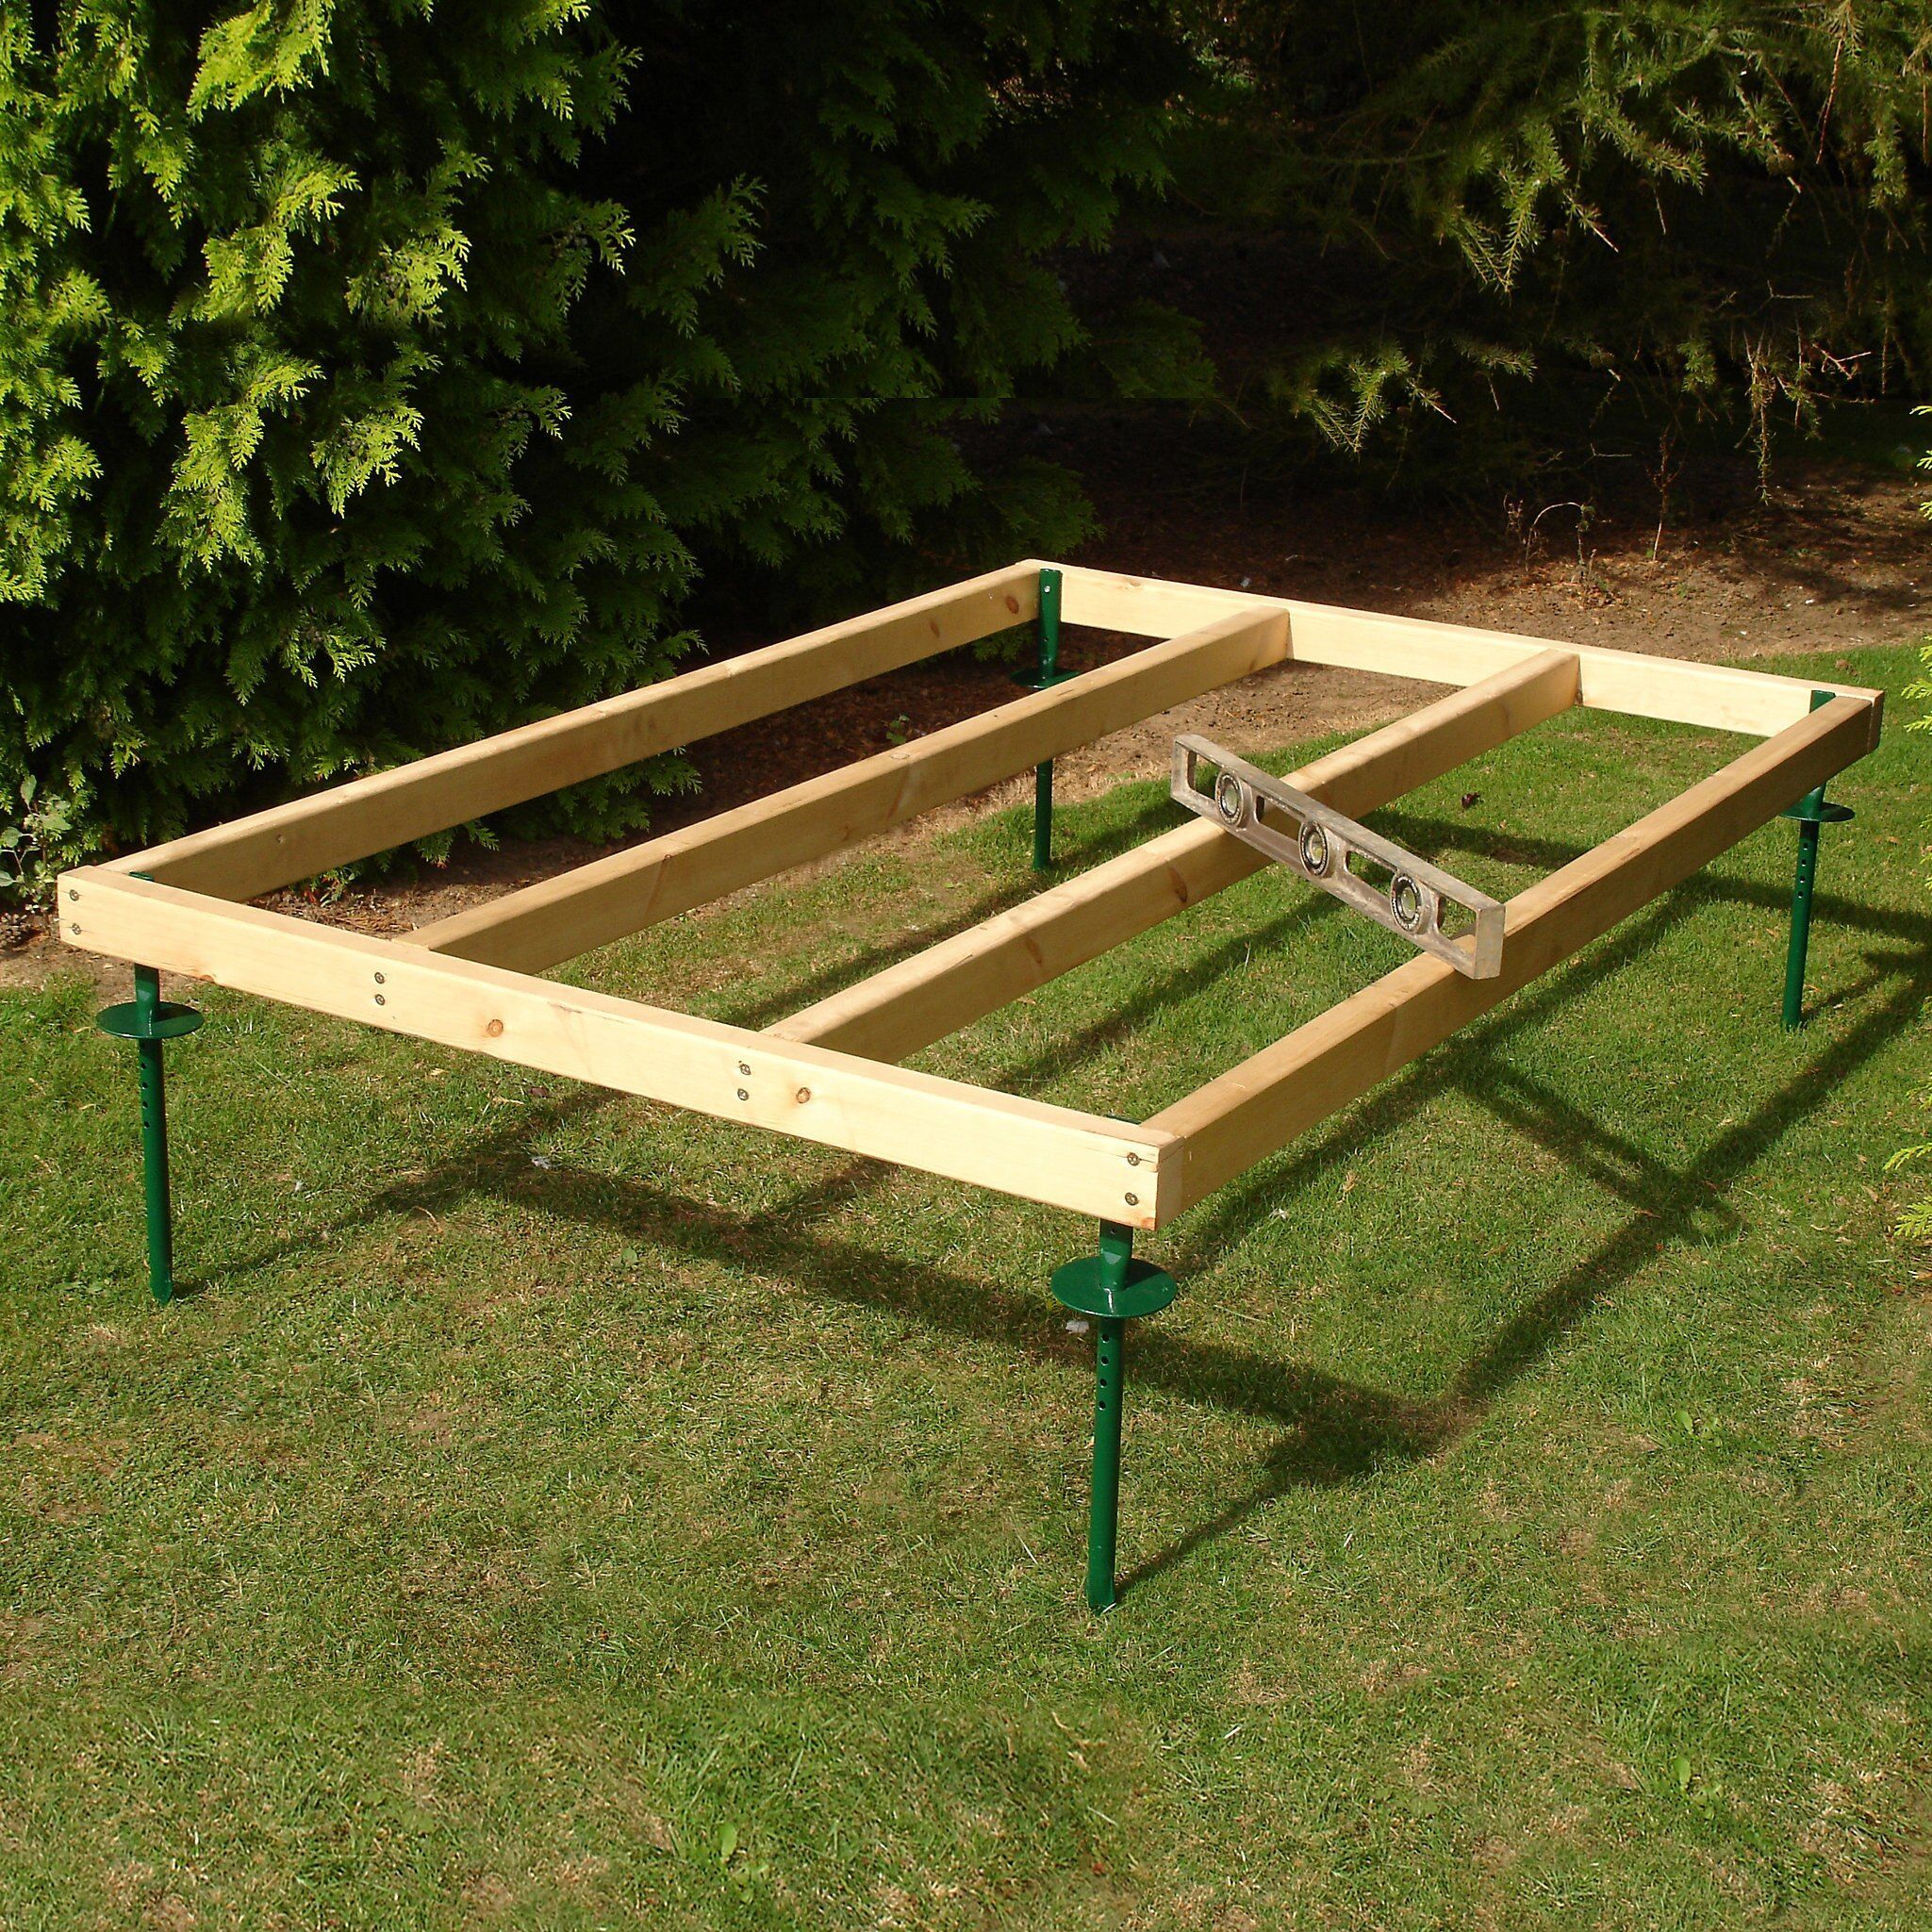 Shire Pressure treated timber base 6x4